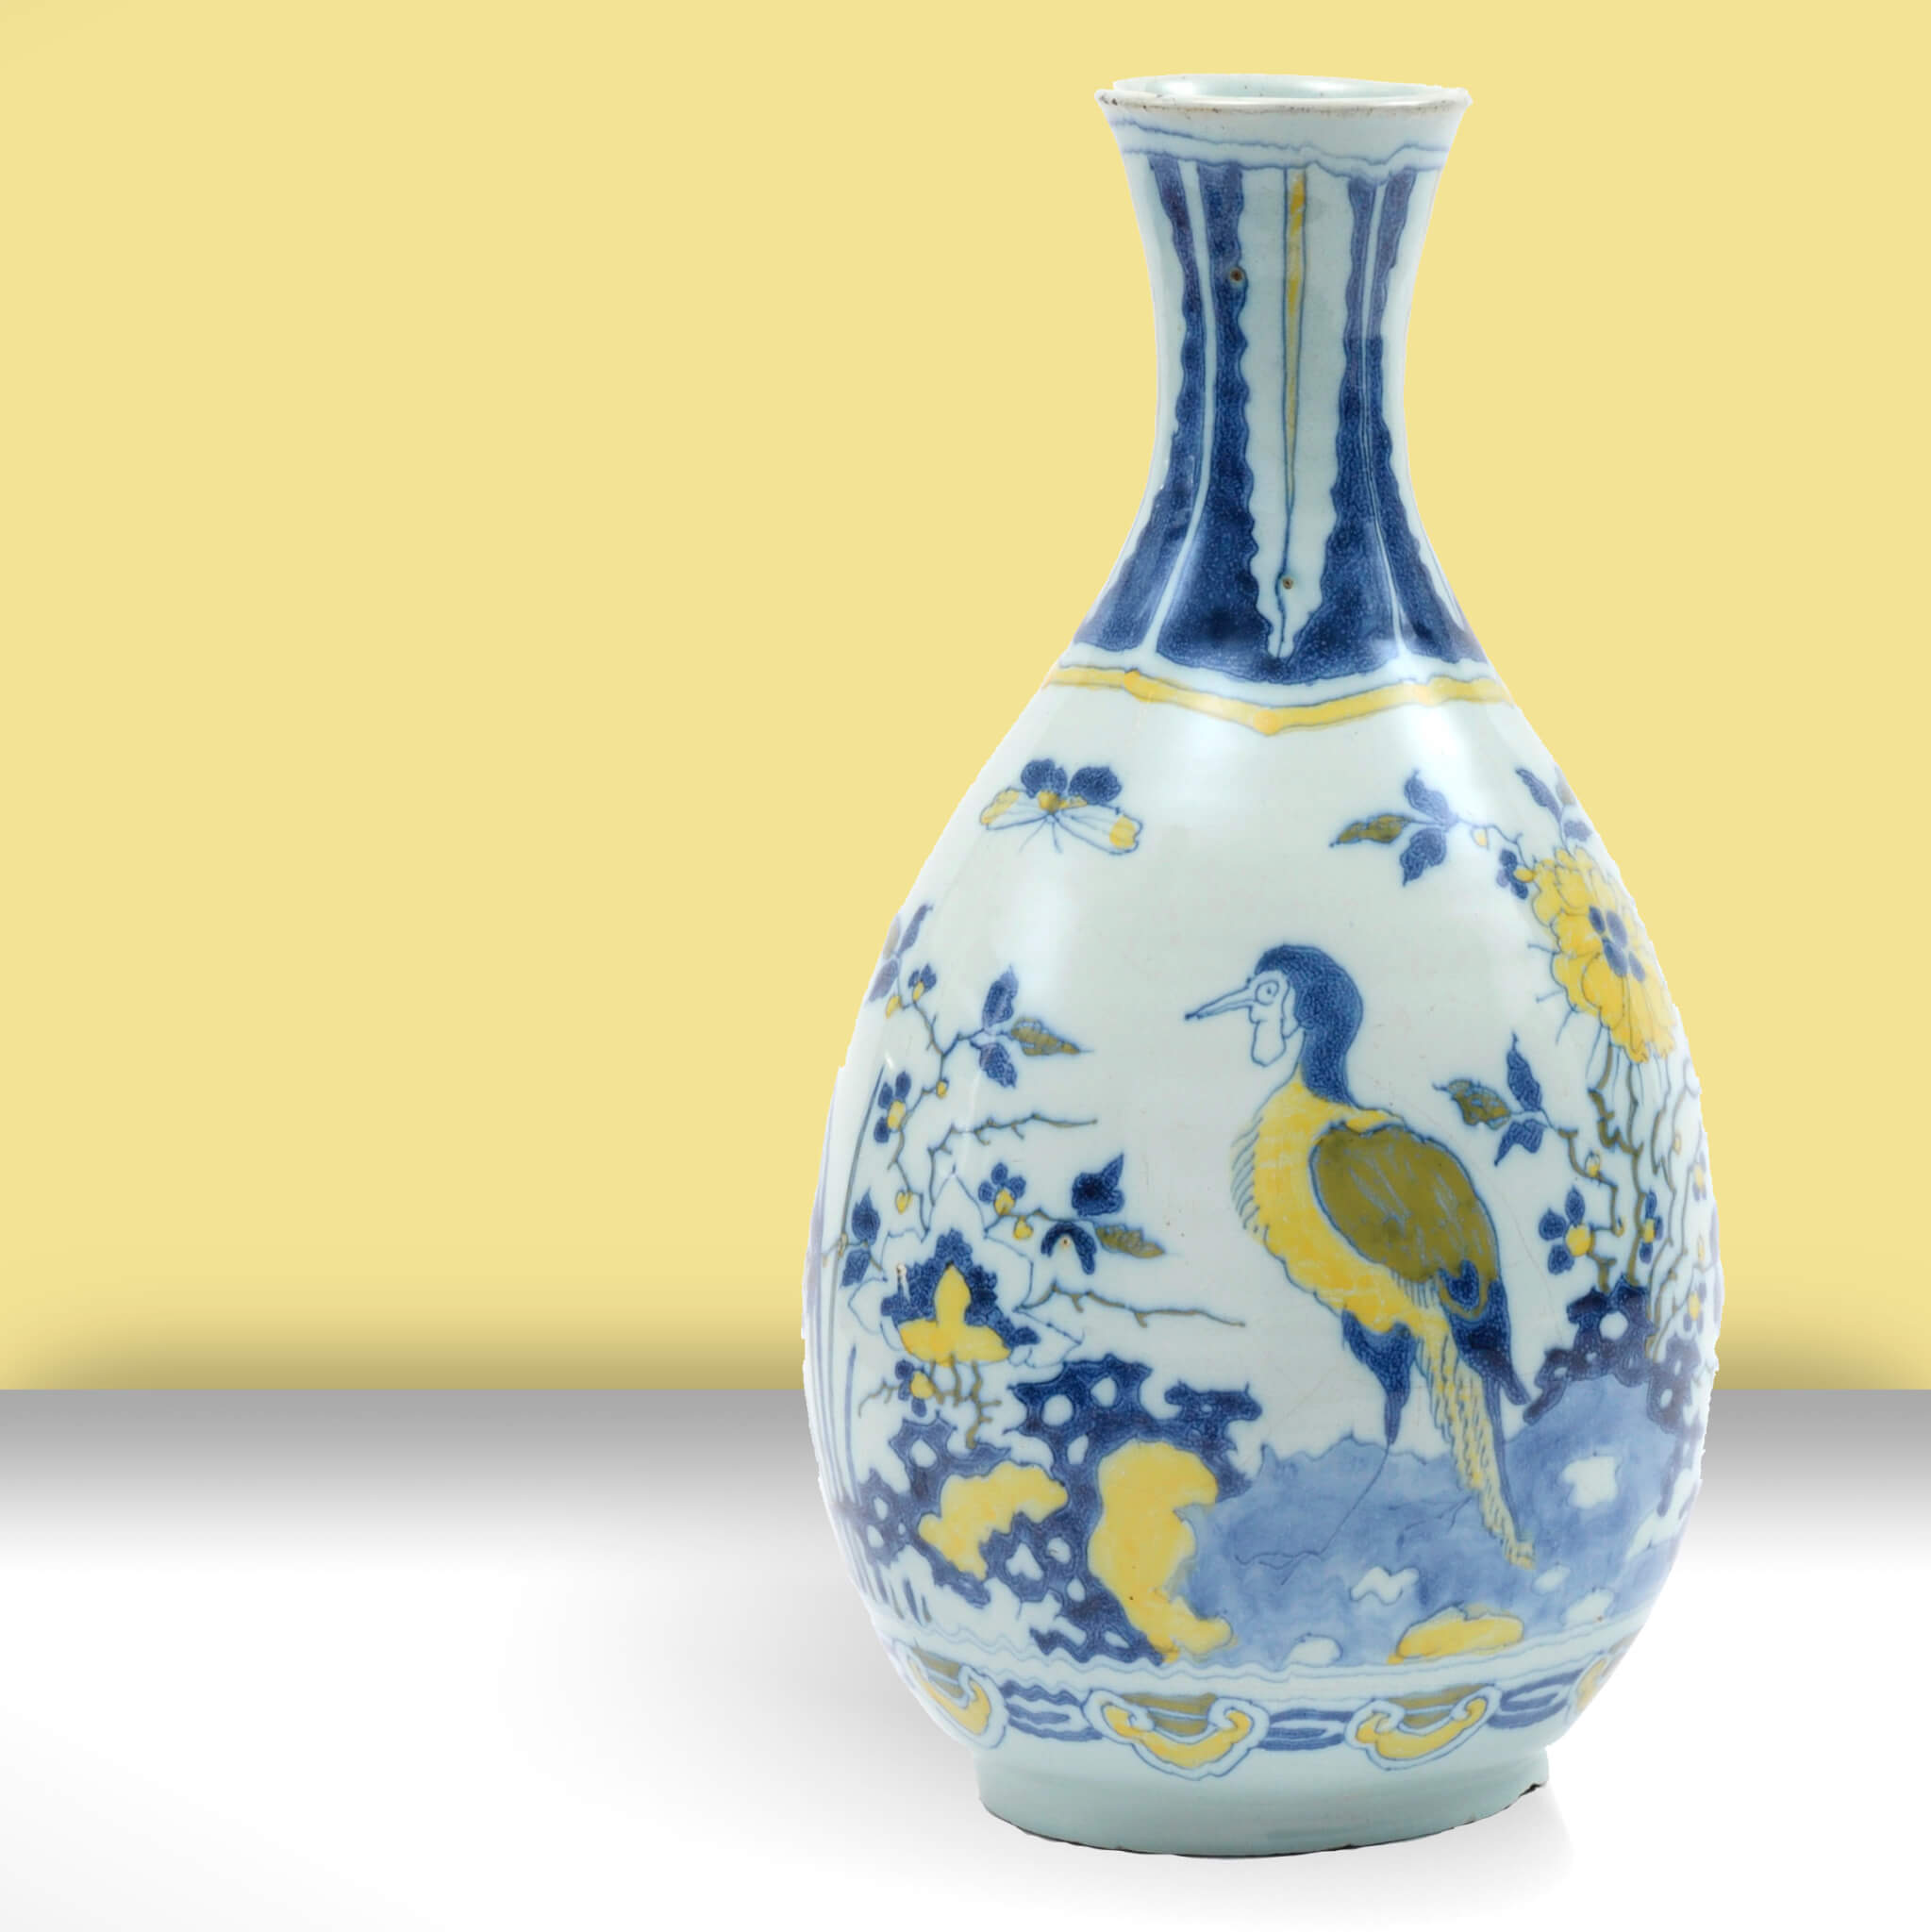 Delftware vase on yellow background